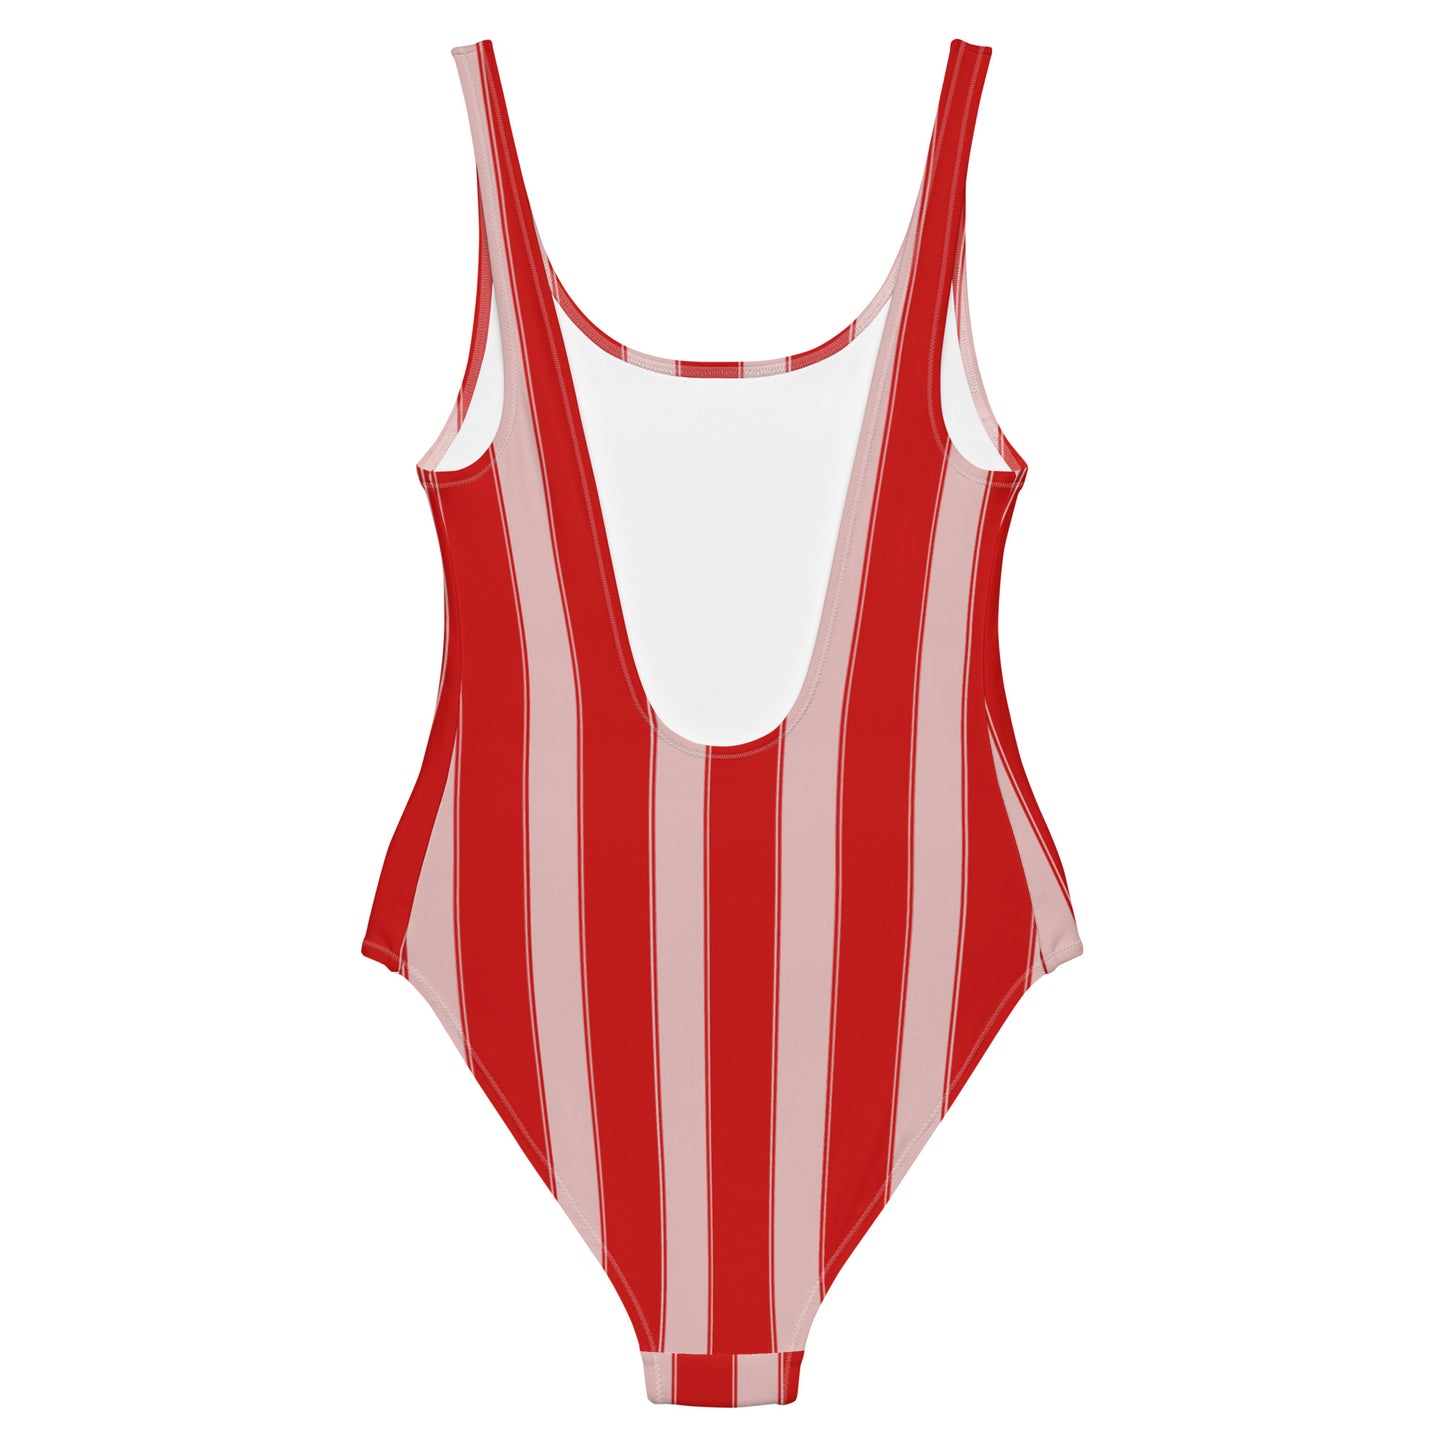 Striped One-Piece Swimsuit In PInk and Red